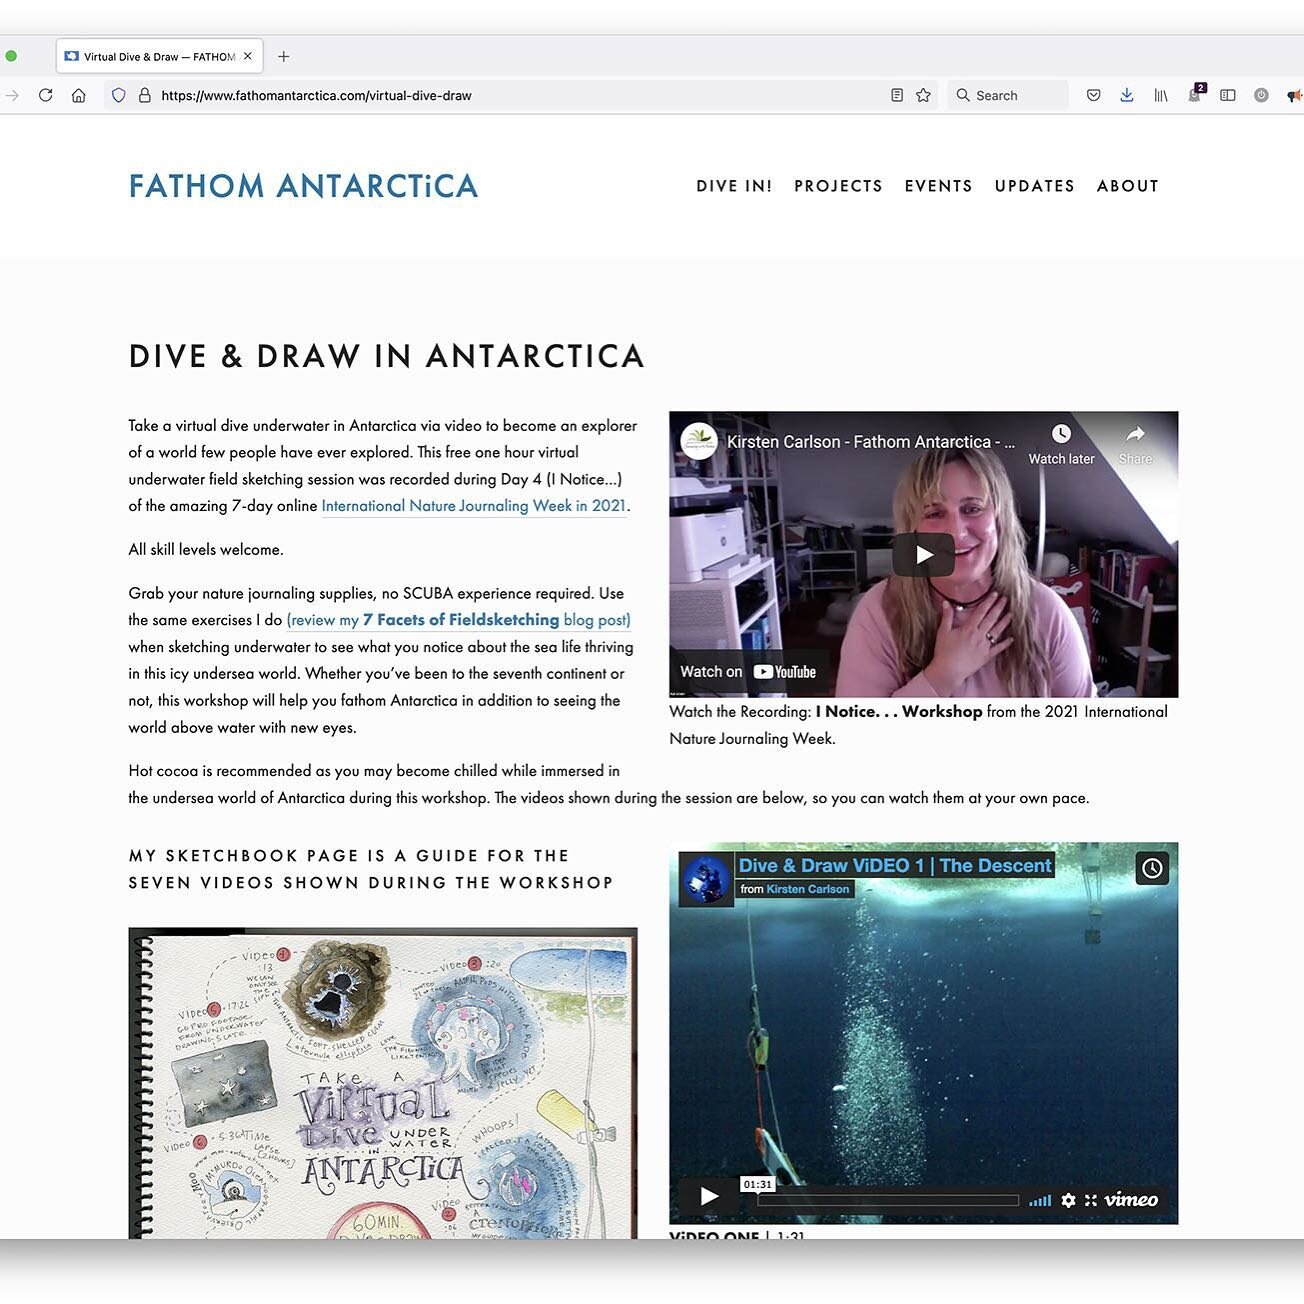 All the resources are ready so you can go on a free one hour nature journaling session with me underwater in #Antarctica 🤿 link in profile: Dive &amp; Draw Underwater in Antarctica 🥰 originally recorded for @journalingwithnature